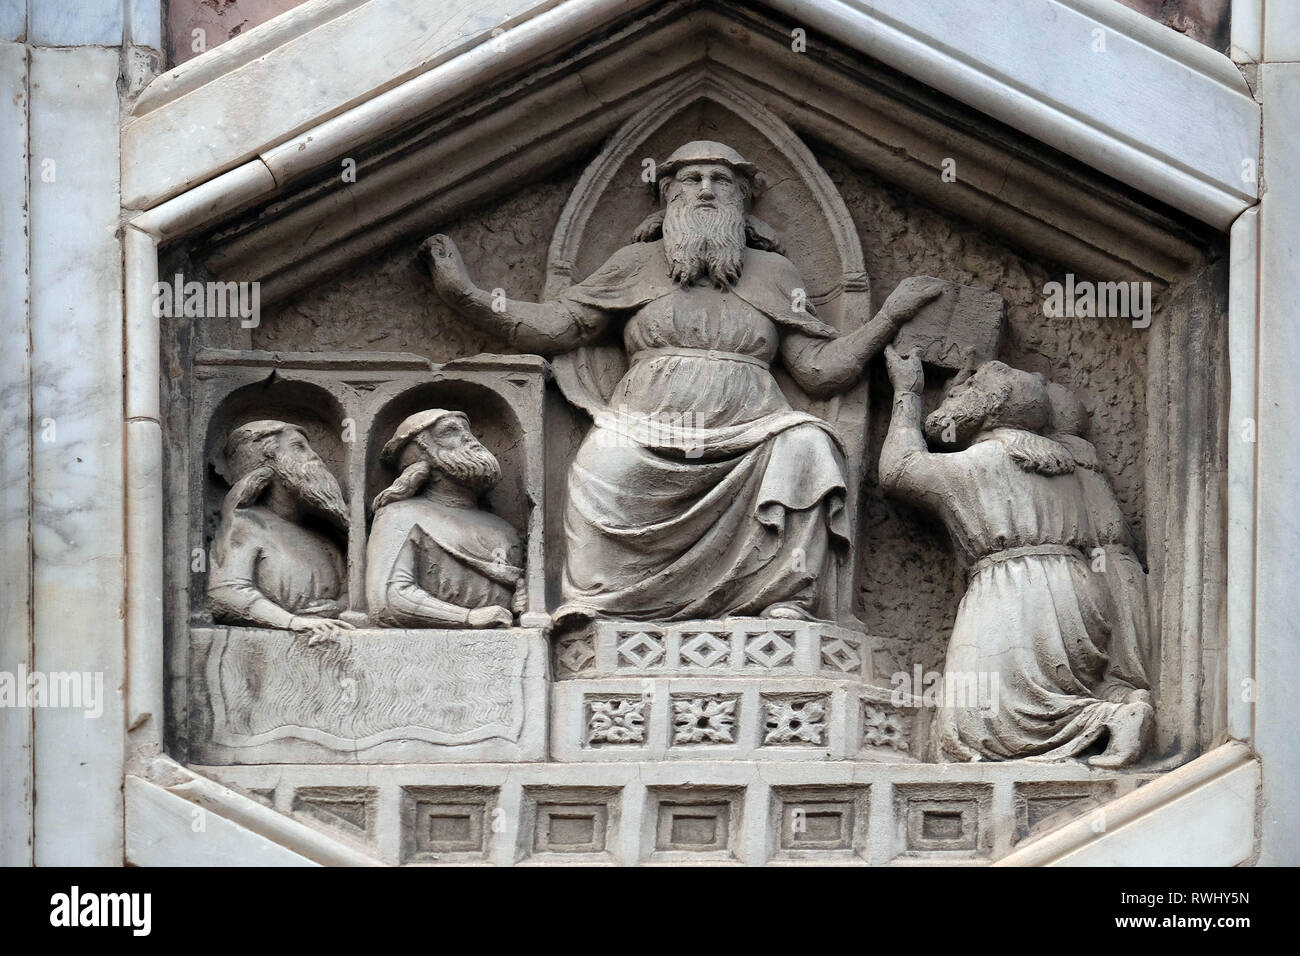 King Phoroneus as personification of the beginning of the law making, Campanile of Cattedrale di Santa Maria del Fiore in Florence Stock Photo